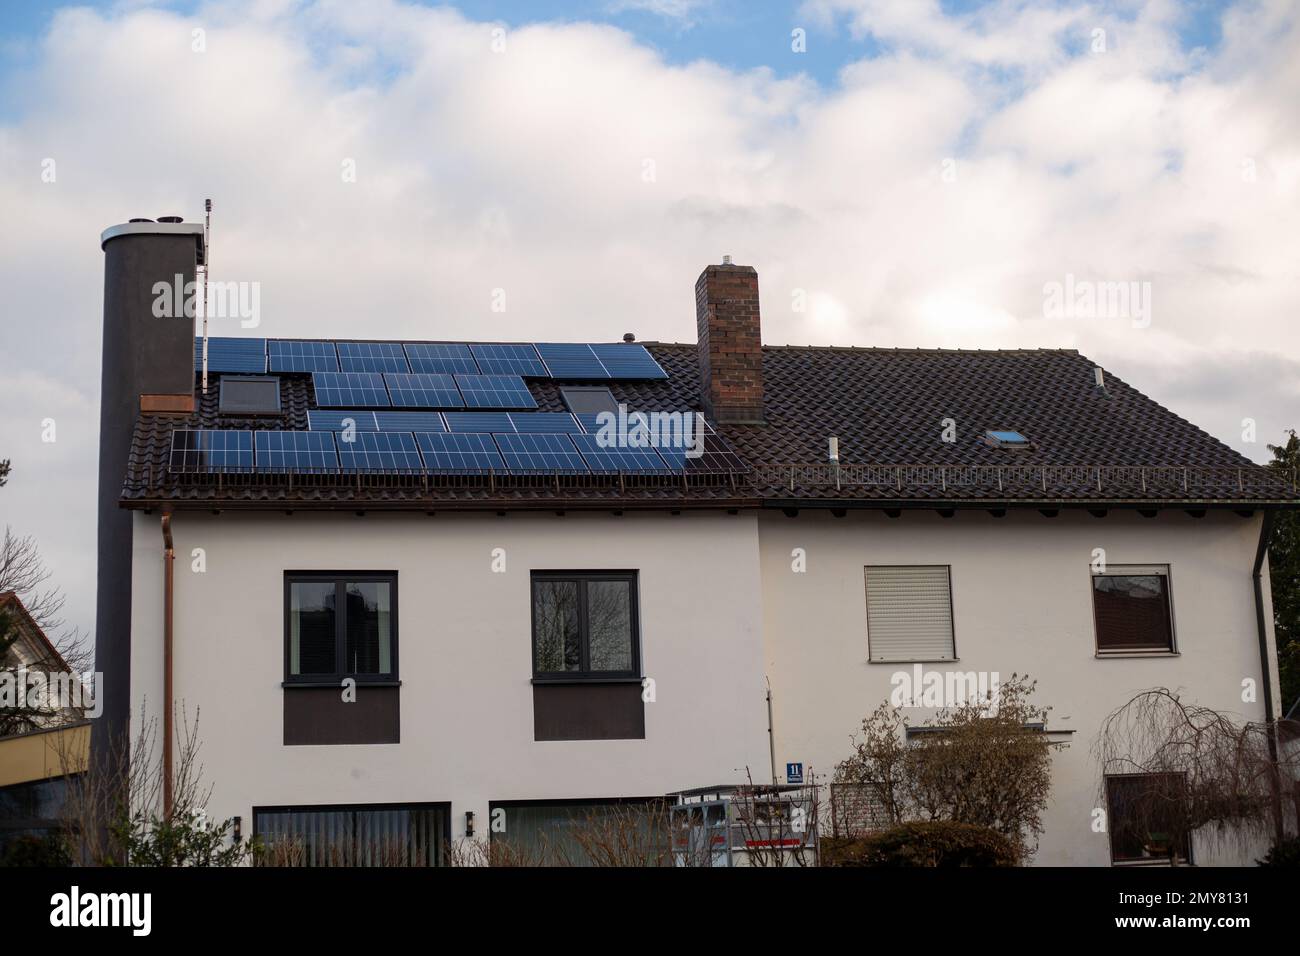 Munich, Germany. 04th Feb, 2023. Haus mit Photovoltaikanlage auf dem Dach am 4.2.2023 in München. Mieten steigen, Immobilienpreise sinken. -- Residential property with solar panels on the roof seen on February 4, 2023 in Munich, Germany. (Photo by Alexander Pohl/Sipa USA) Credit: Sipa USA/Alamy Live News Stock Photo